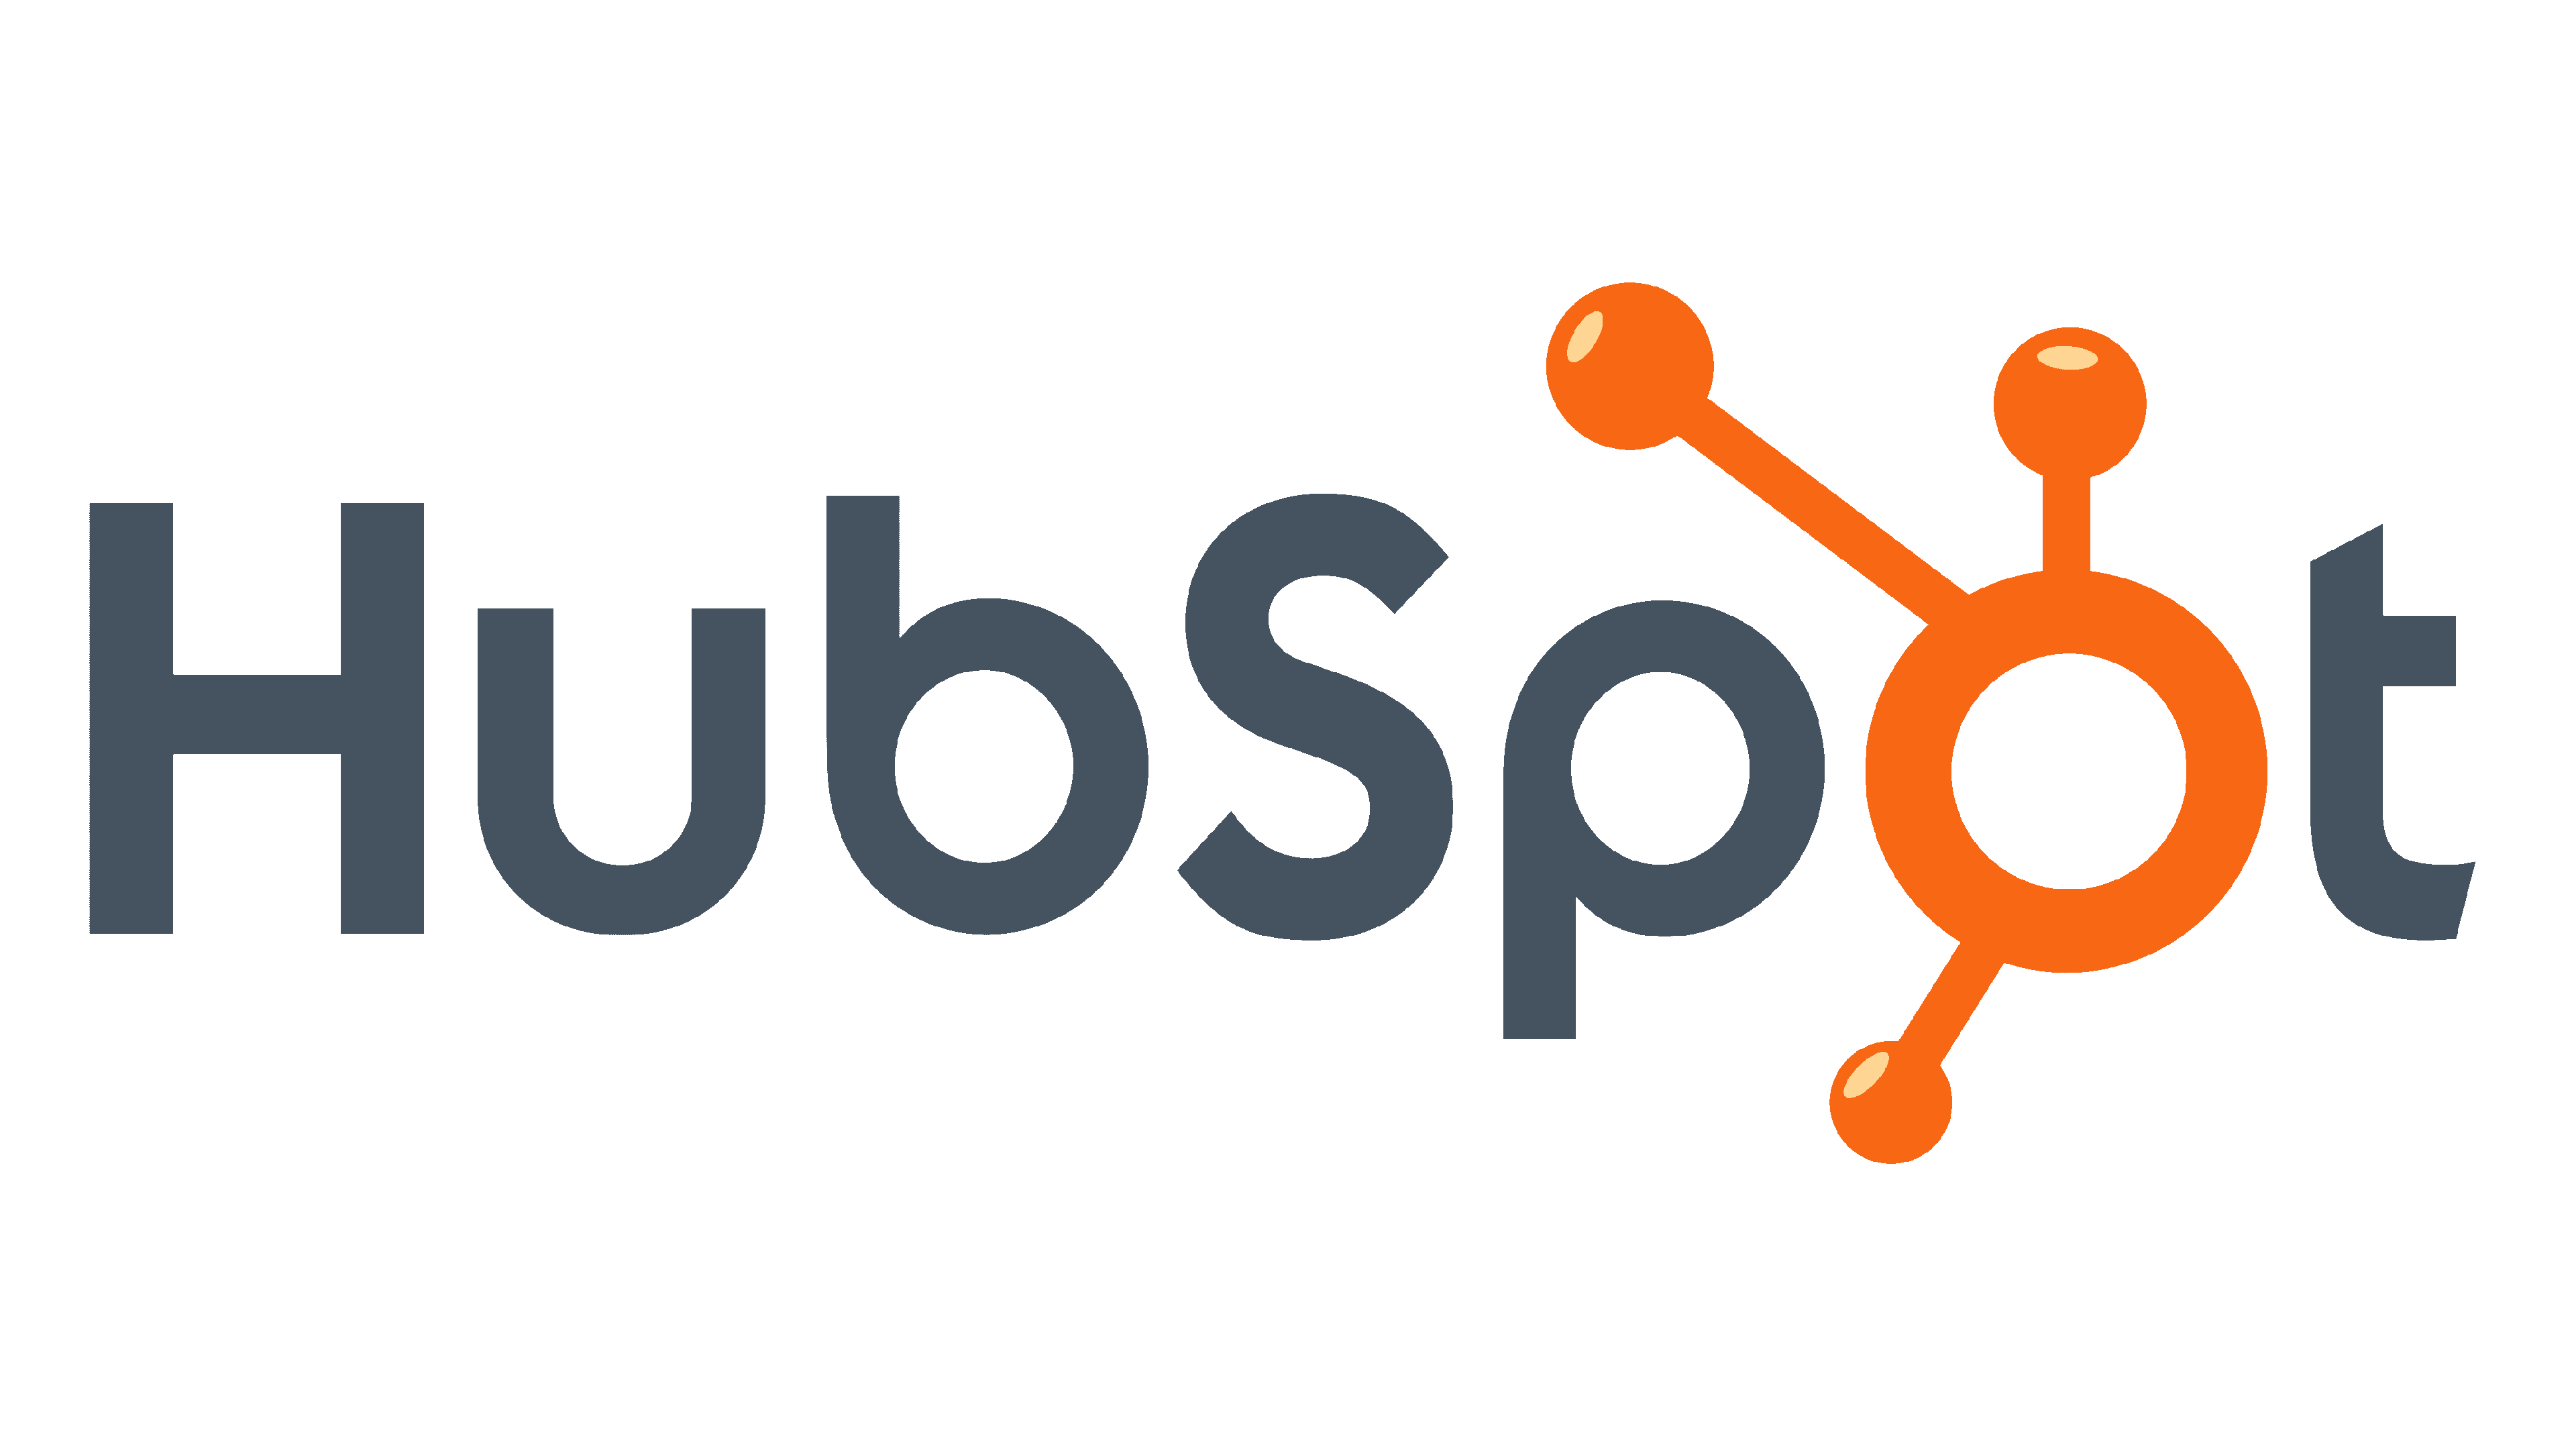 Read more about the article Top 10 benefit of HubSpot to Grow your Business